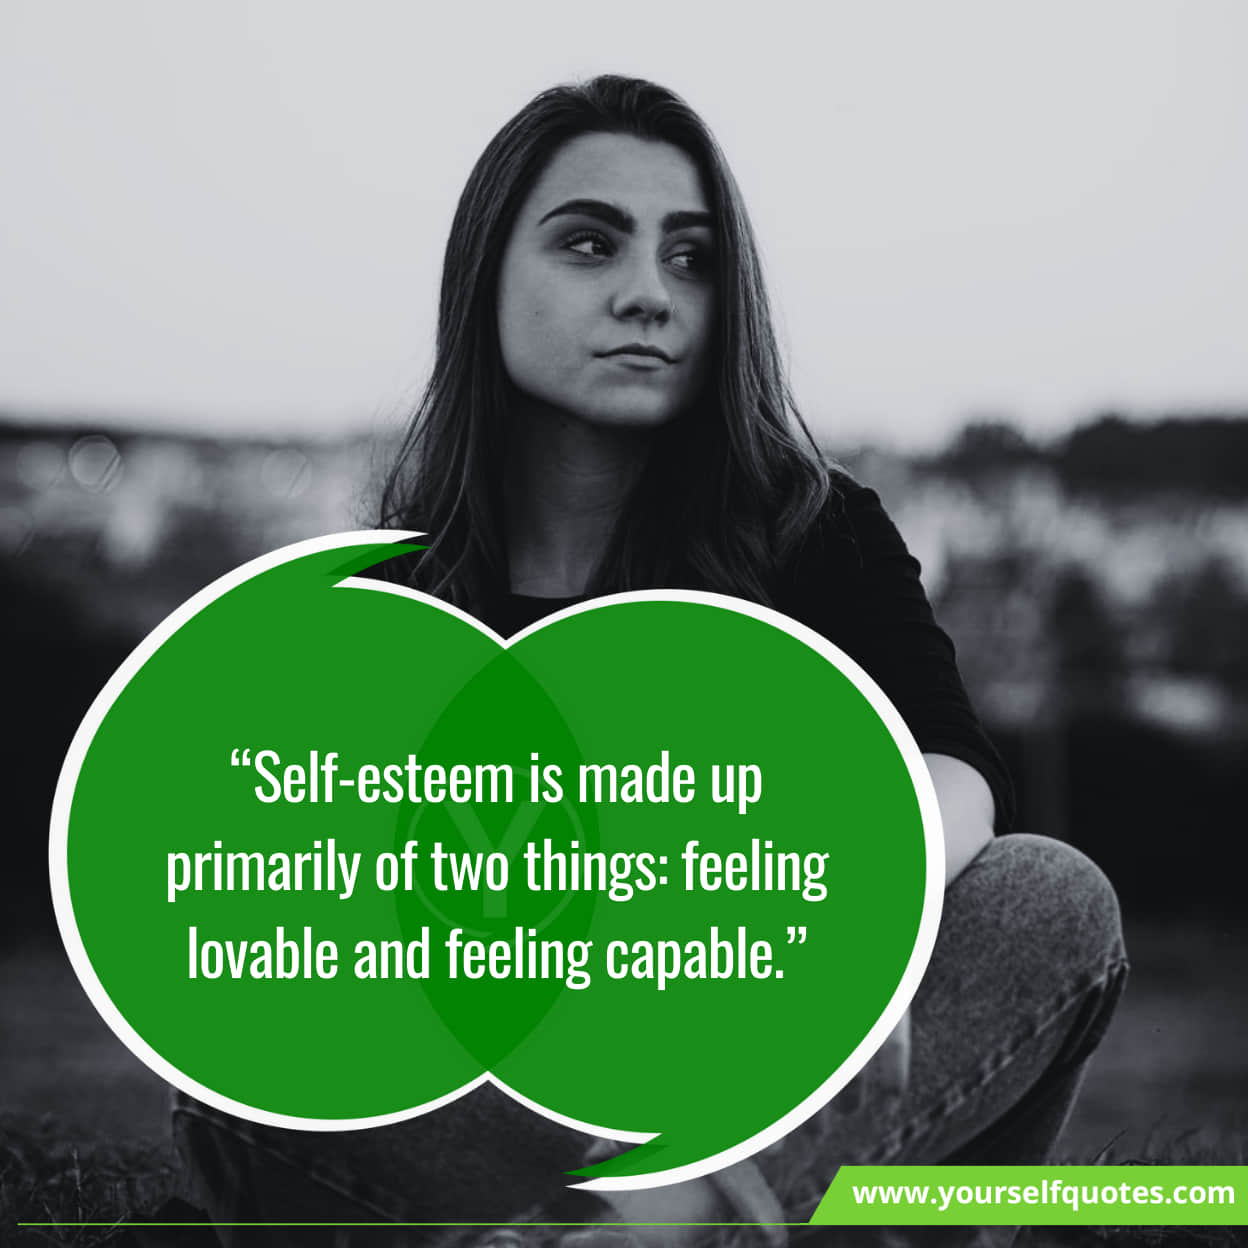 Best Quotes About Myself  To Build Self-Esteem